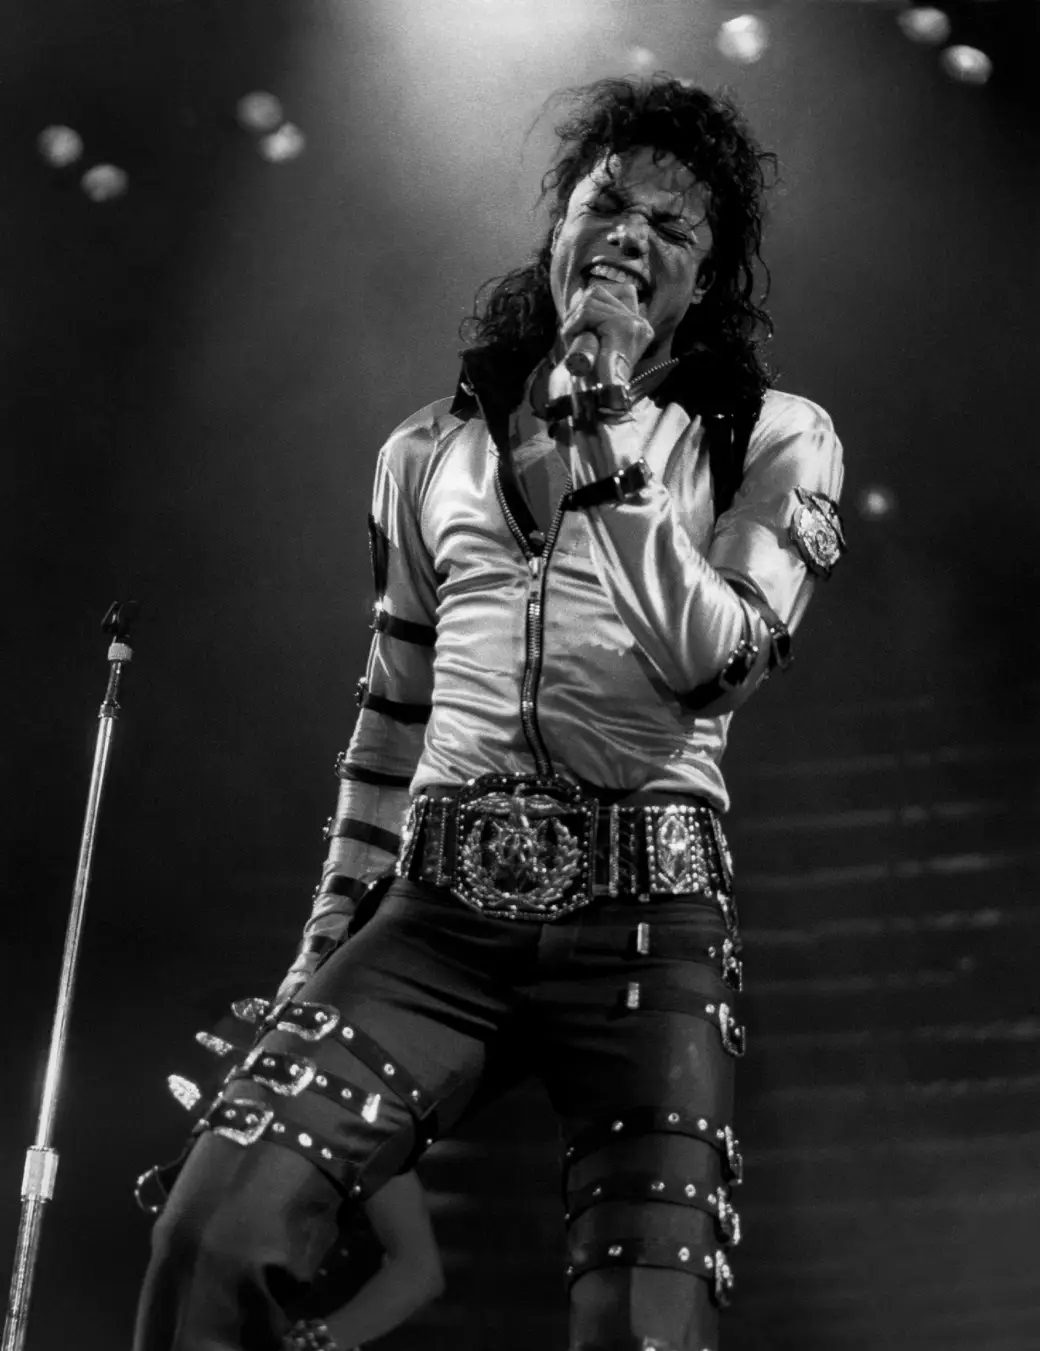 Michael Jackson performs during the Bad tour in Rosemont, Illinois, on April 19, 1988.